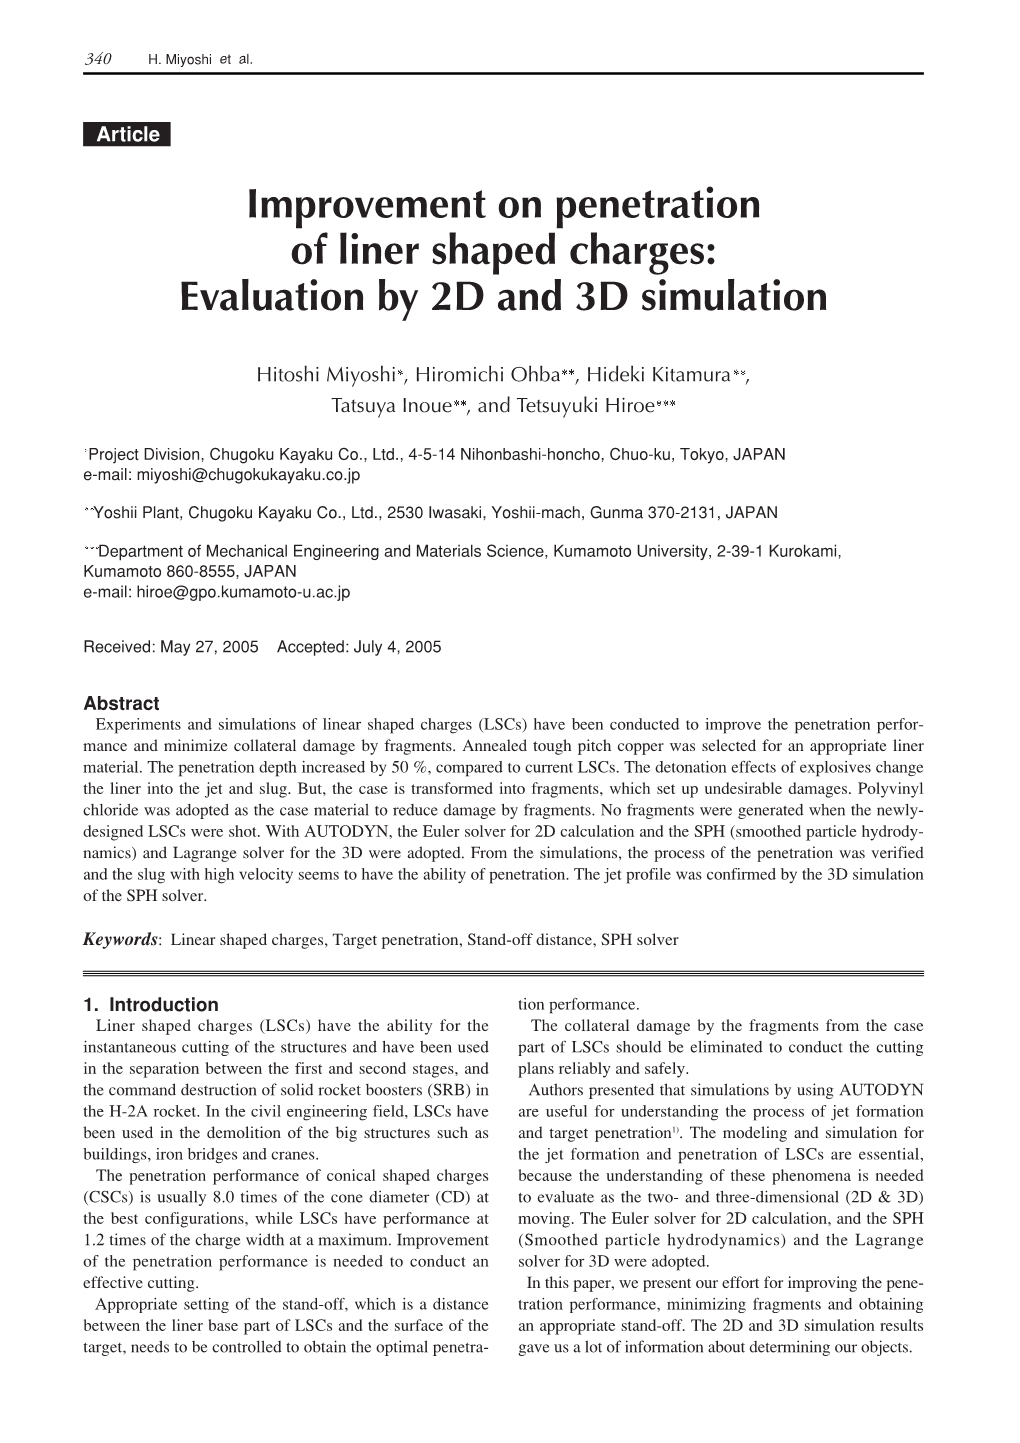 Improvement on Penetration of Liner Shaped Charges: Evaluation by 2D and 3D Simulation